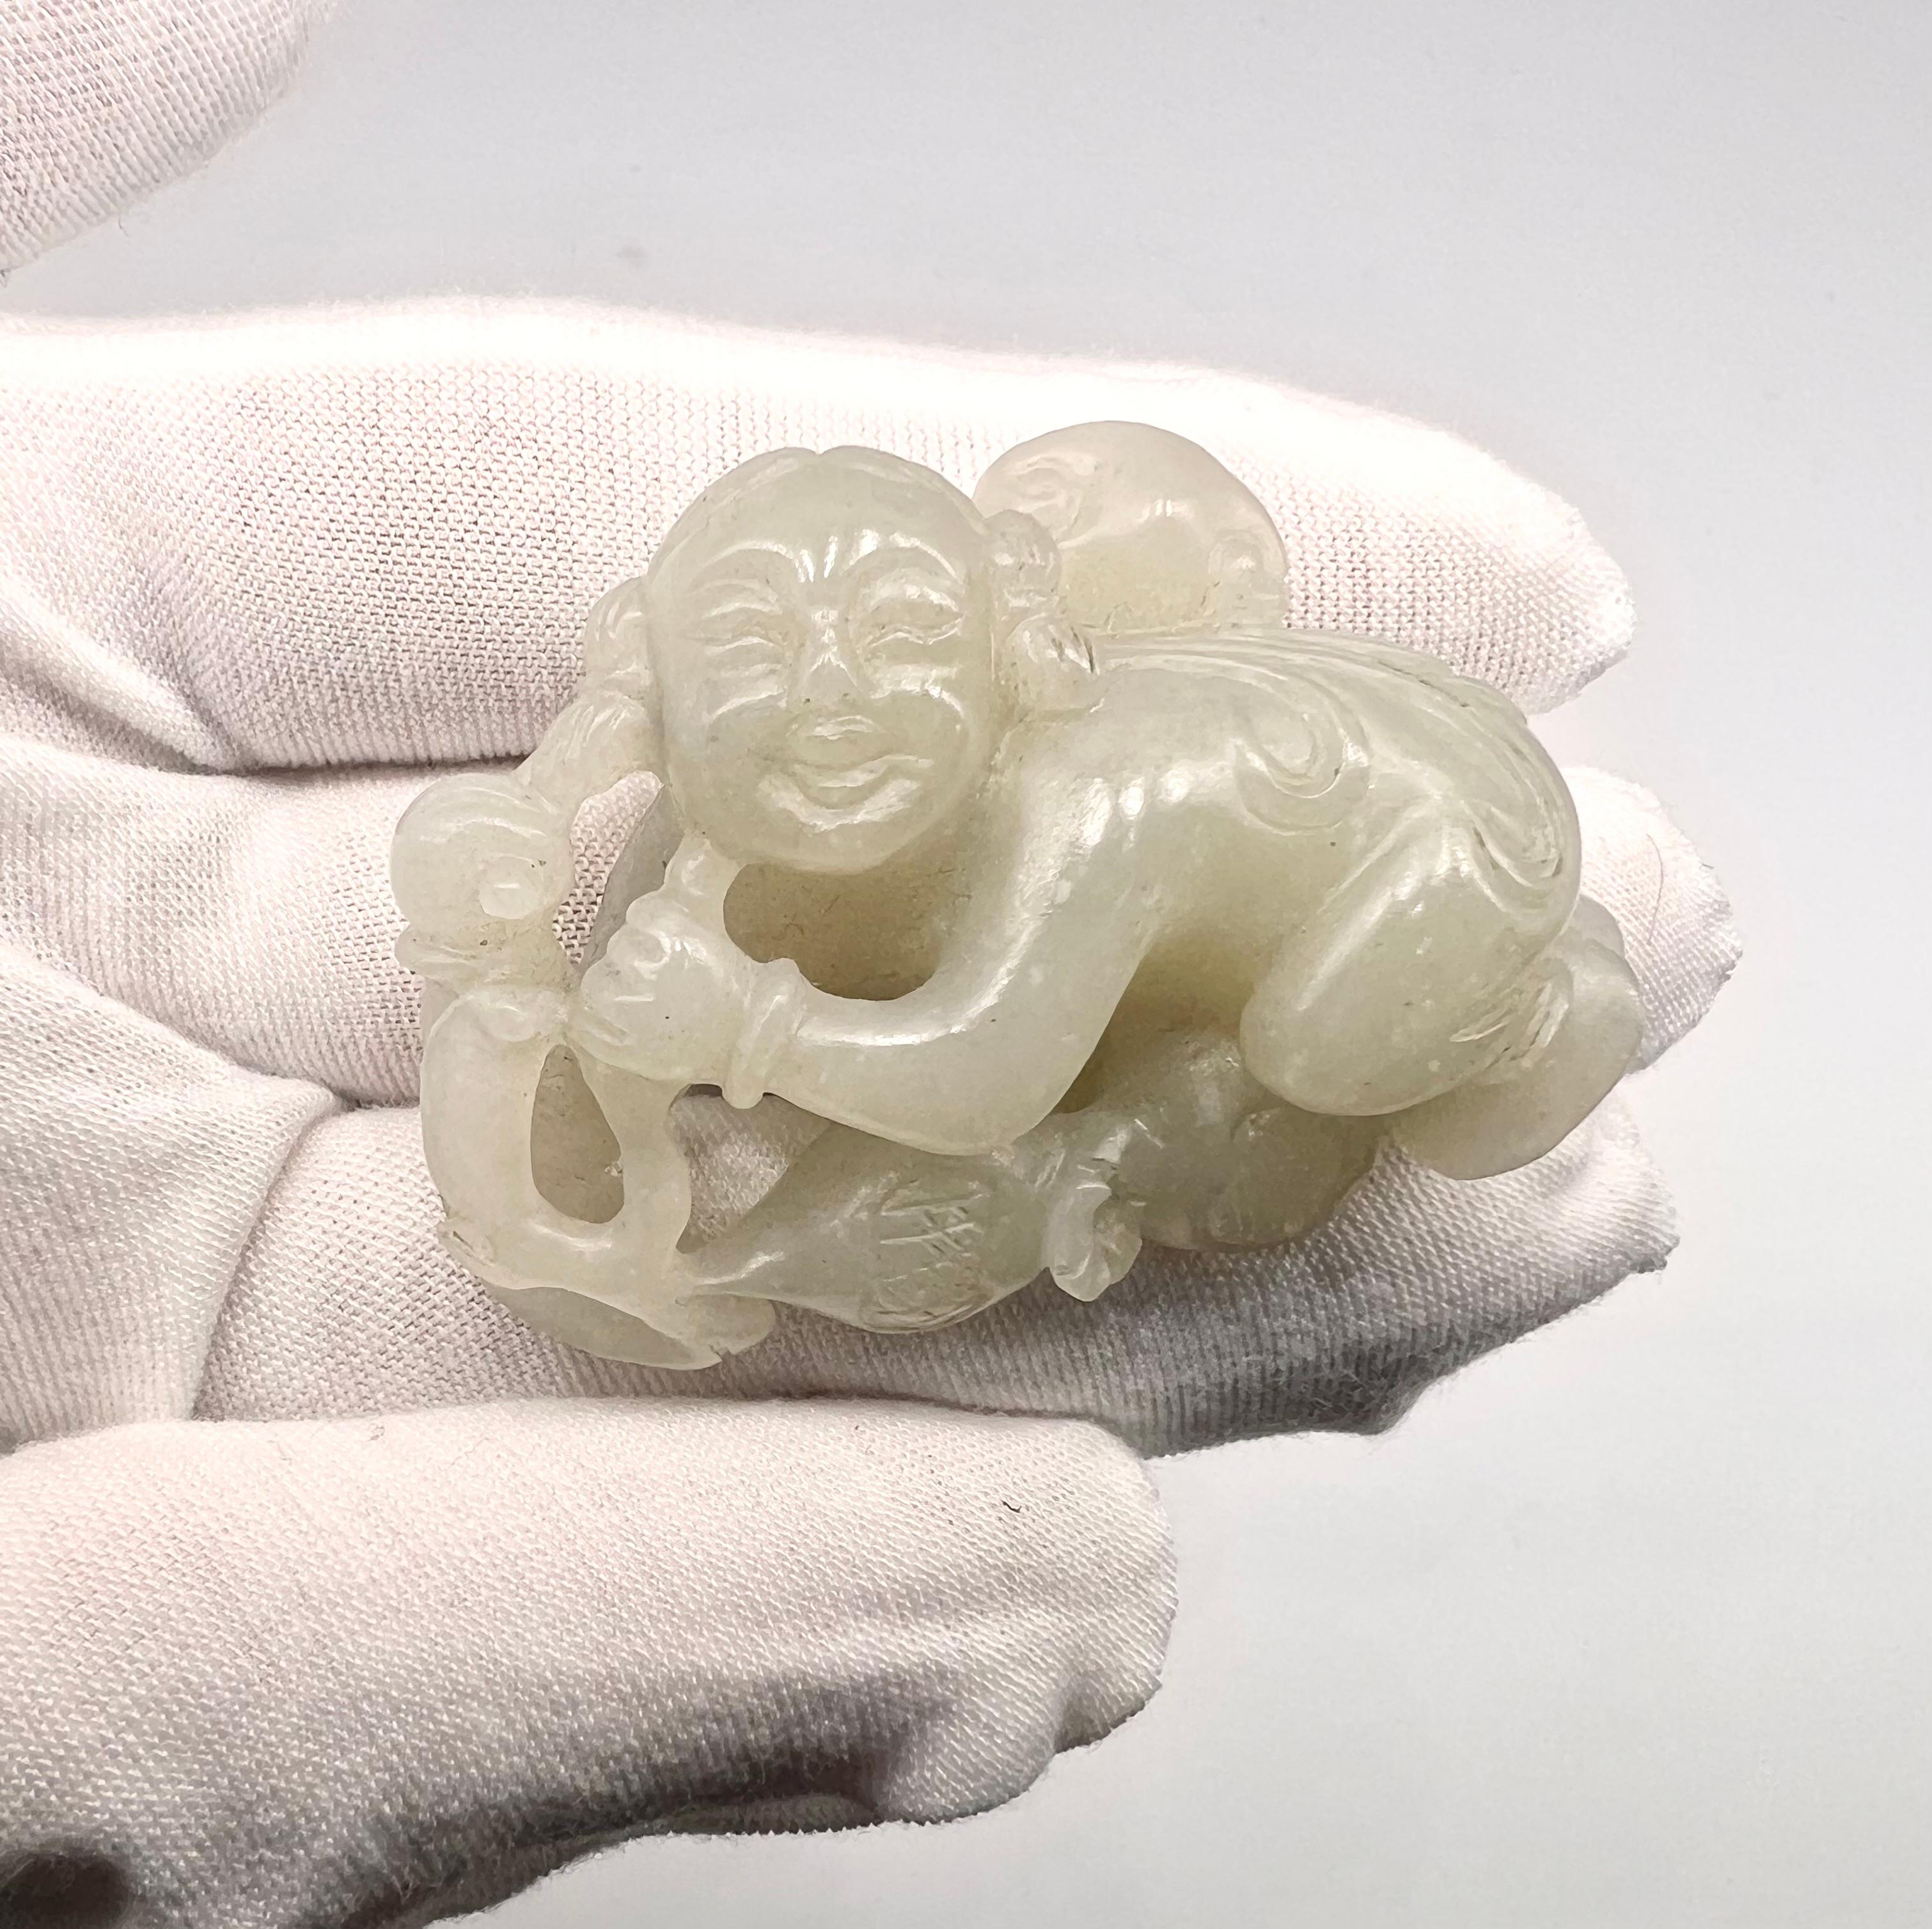 A beautiful Antique chinese white jade open work pendant/carving. 



A magnificent Open work White Nephrite Jade carving of the kneeling boy holding a large lingzhi mushroom.
His round face with fine features set in a merry expression, his head